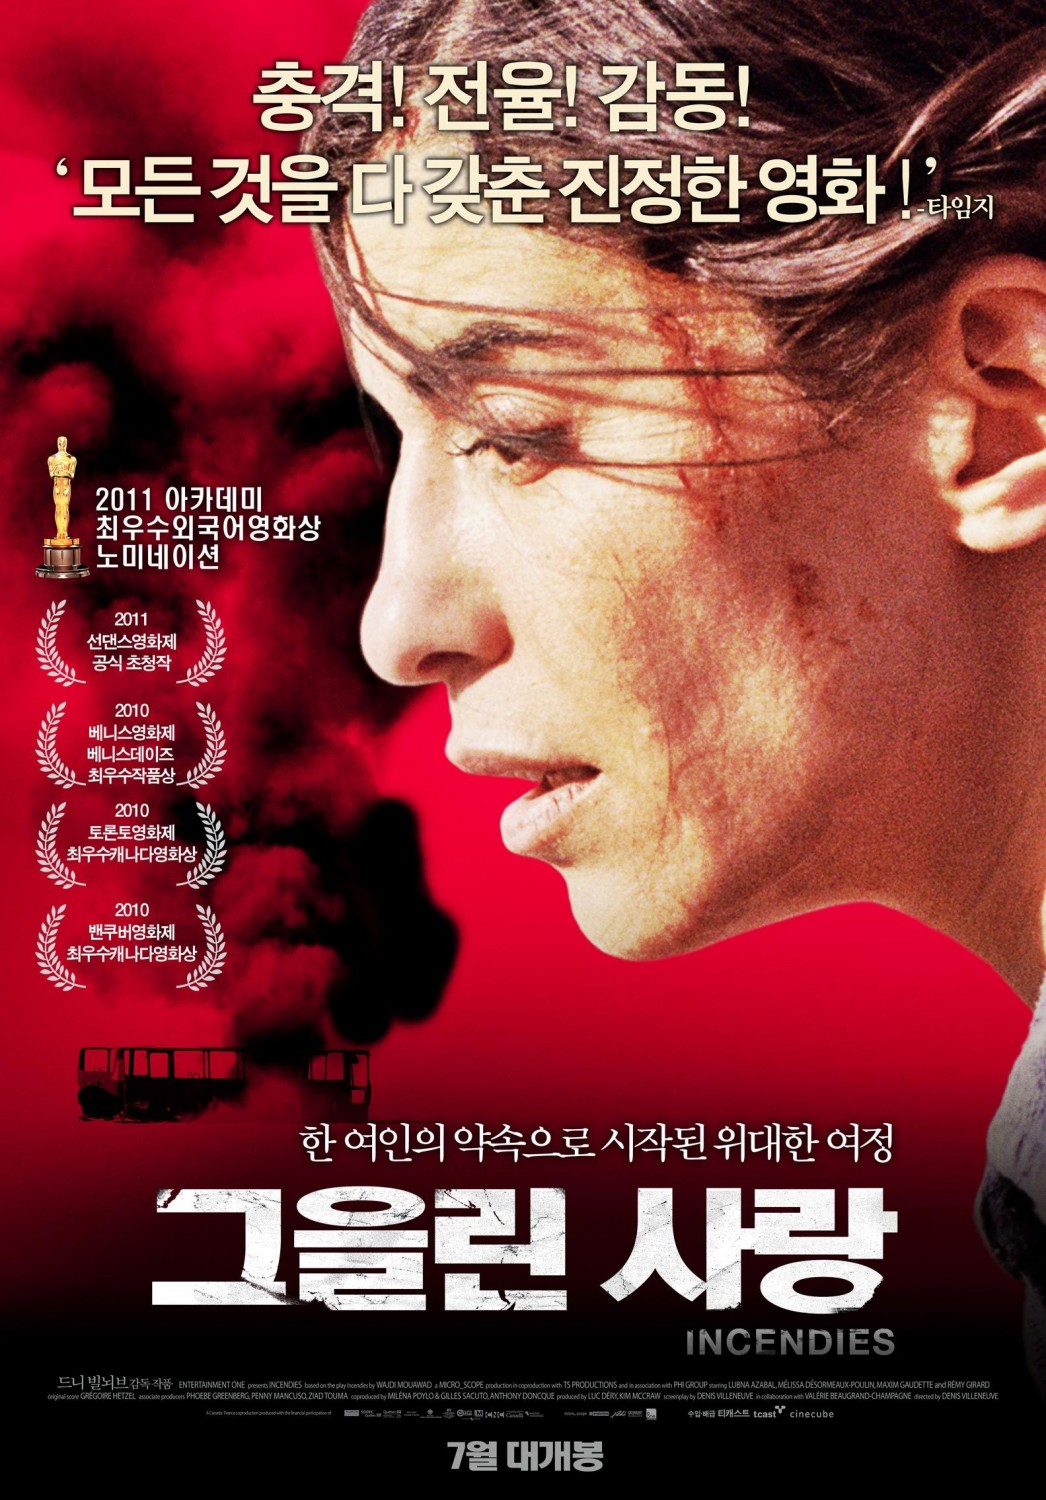 Extra Large Movie Poster Image for Incendies (#7 of 8)